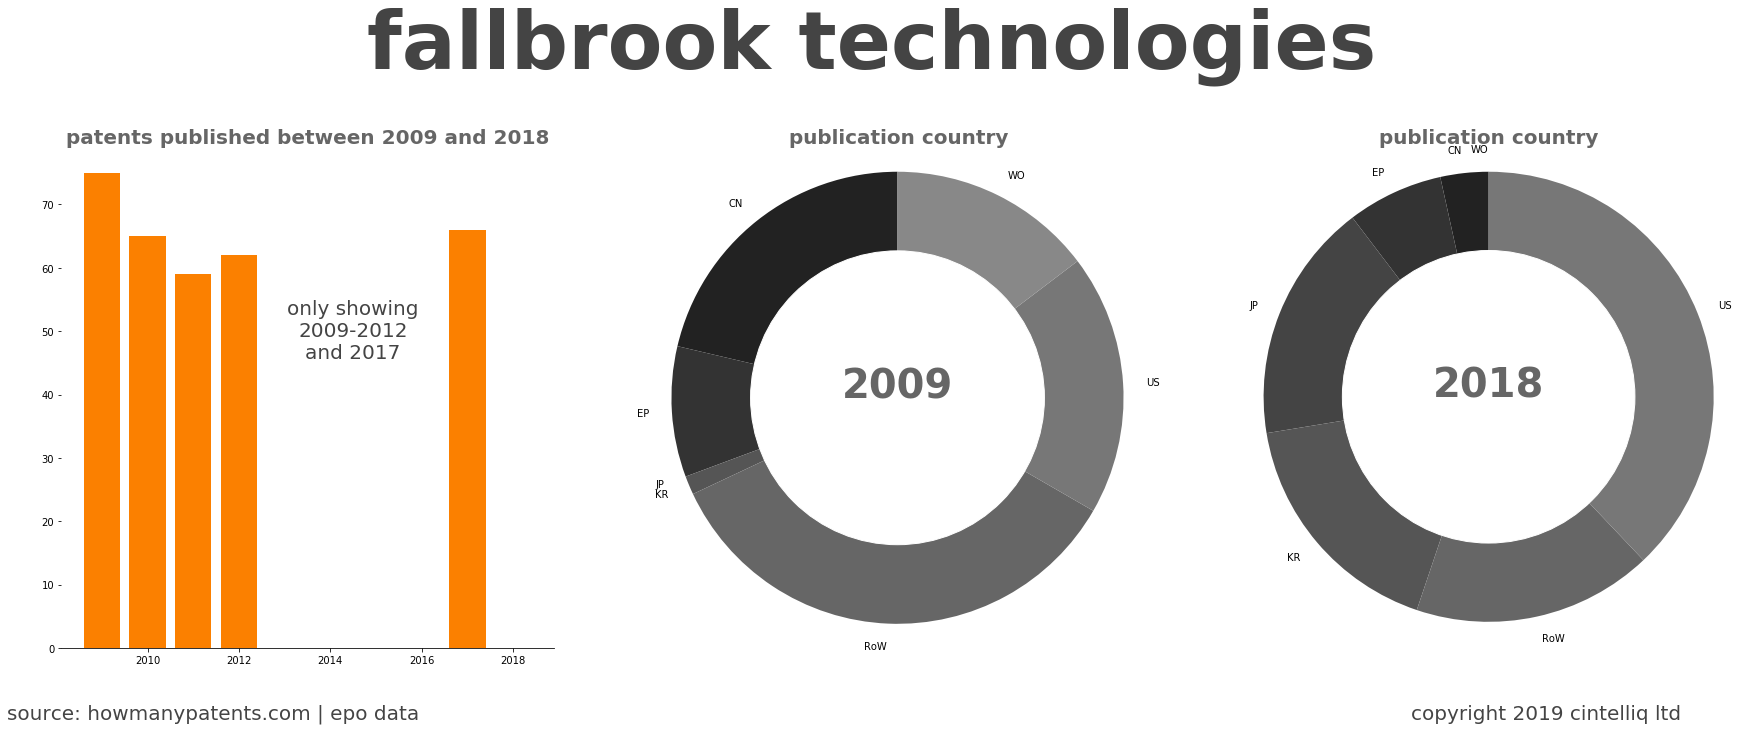 summary of patents for Fallbrook Technologies